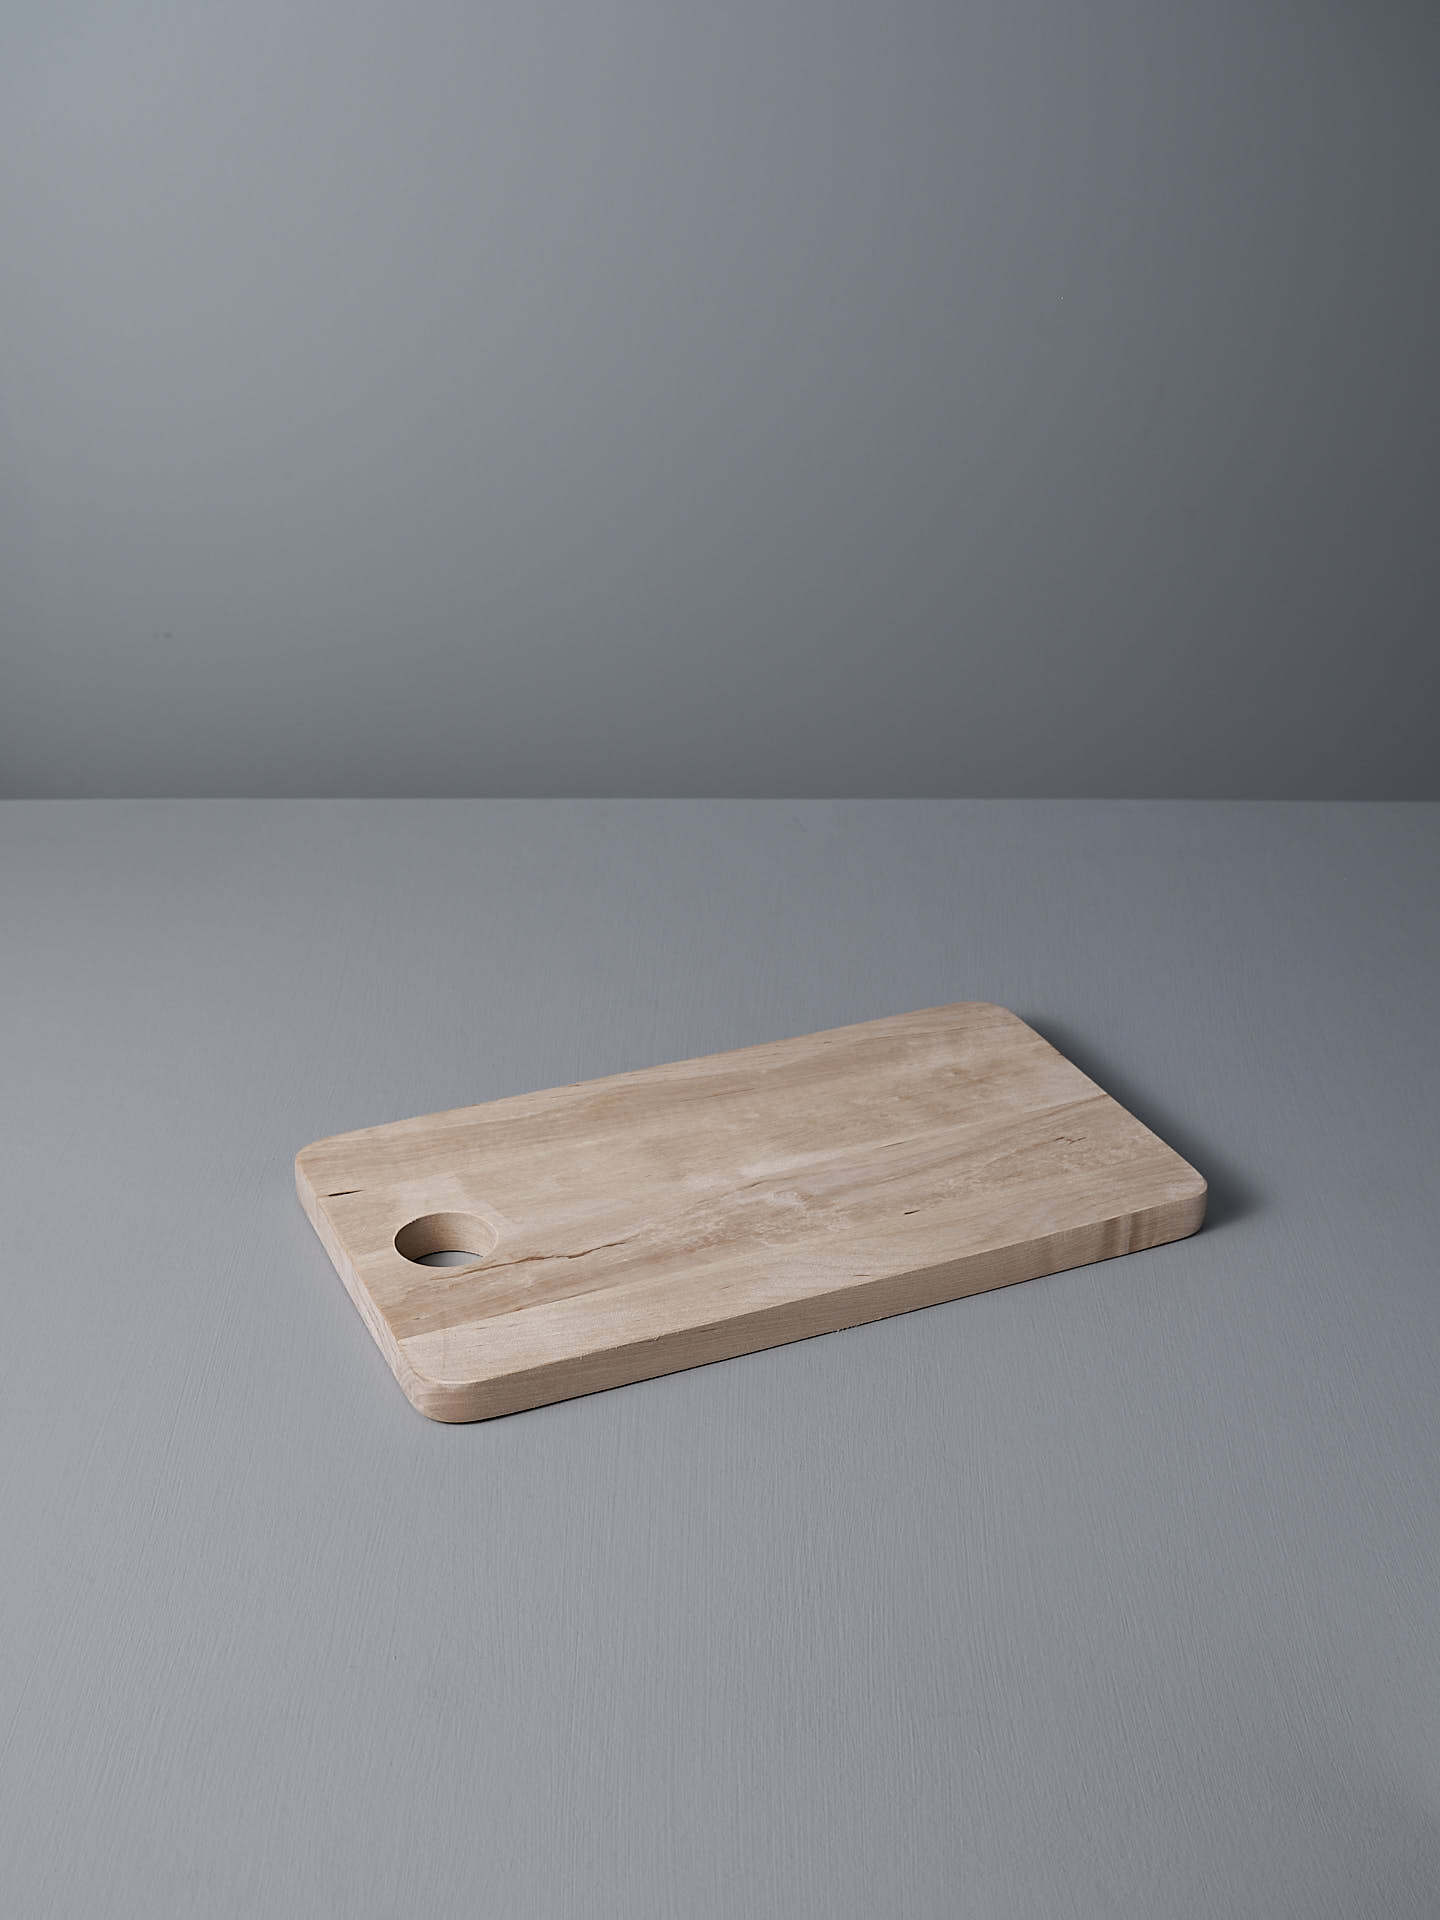 The Birch Chopping Board – Medium from Iris Hantverk, a rectangular wooden board with rounded edges and a circular hole in one corner, ideal as a cheese board, is placed on a gray surface with a matching gray background.